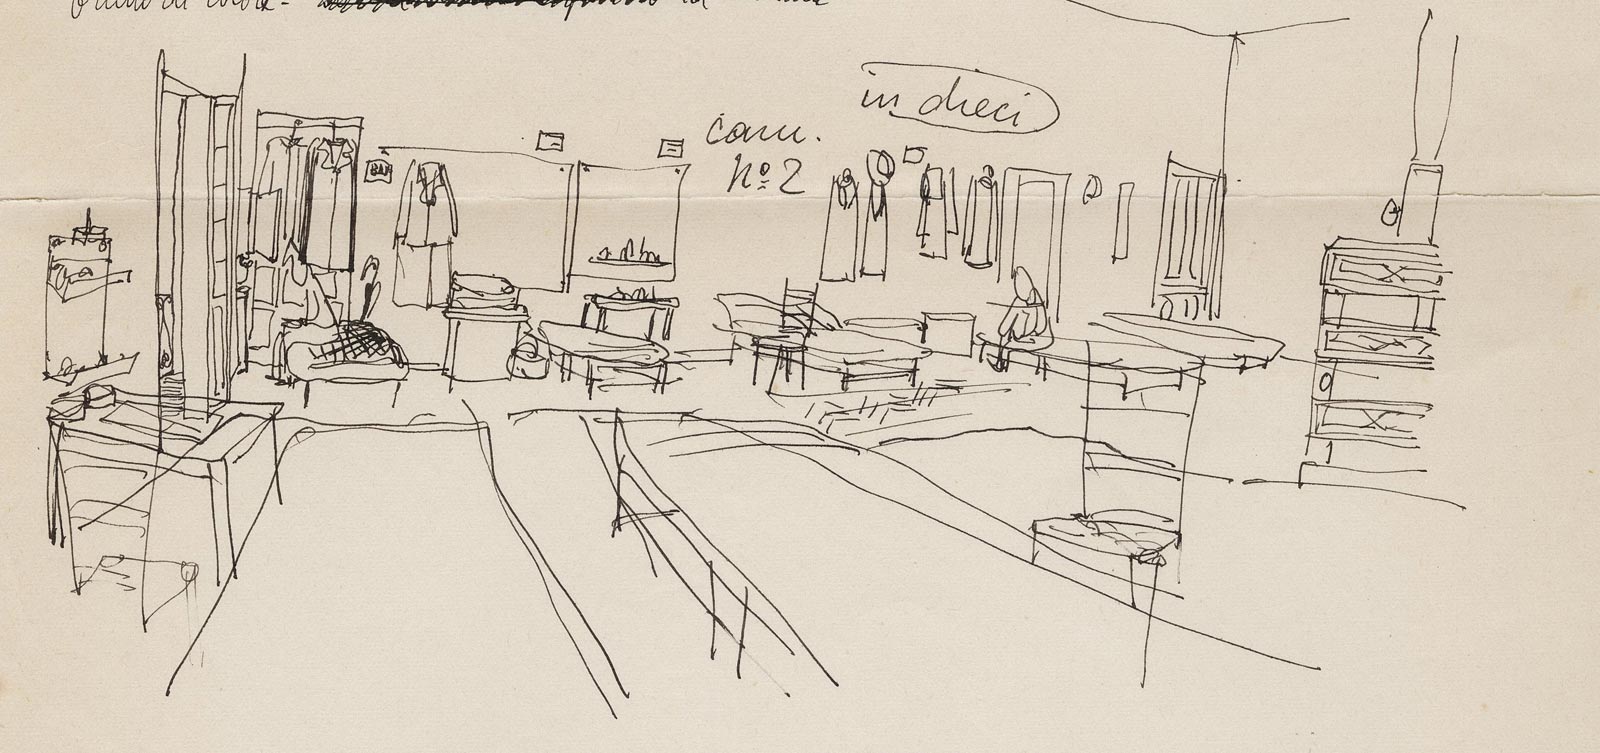 Sketch of the prisoners’ dormitory in the internment camp at Tortoreto, May 1941, from a 1940-43 journal. Saul Steinberg Papers, Beinecke Rare Book and Manuscript Library, Yale University.